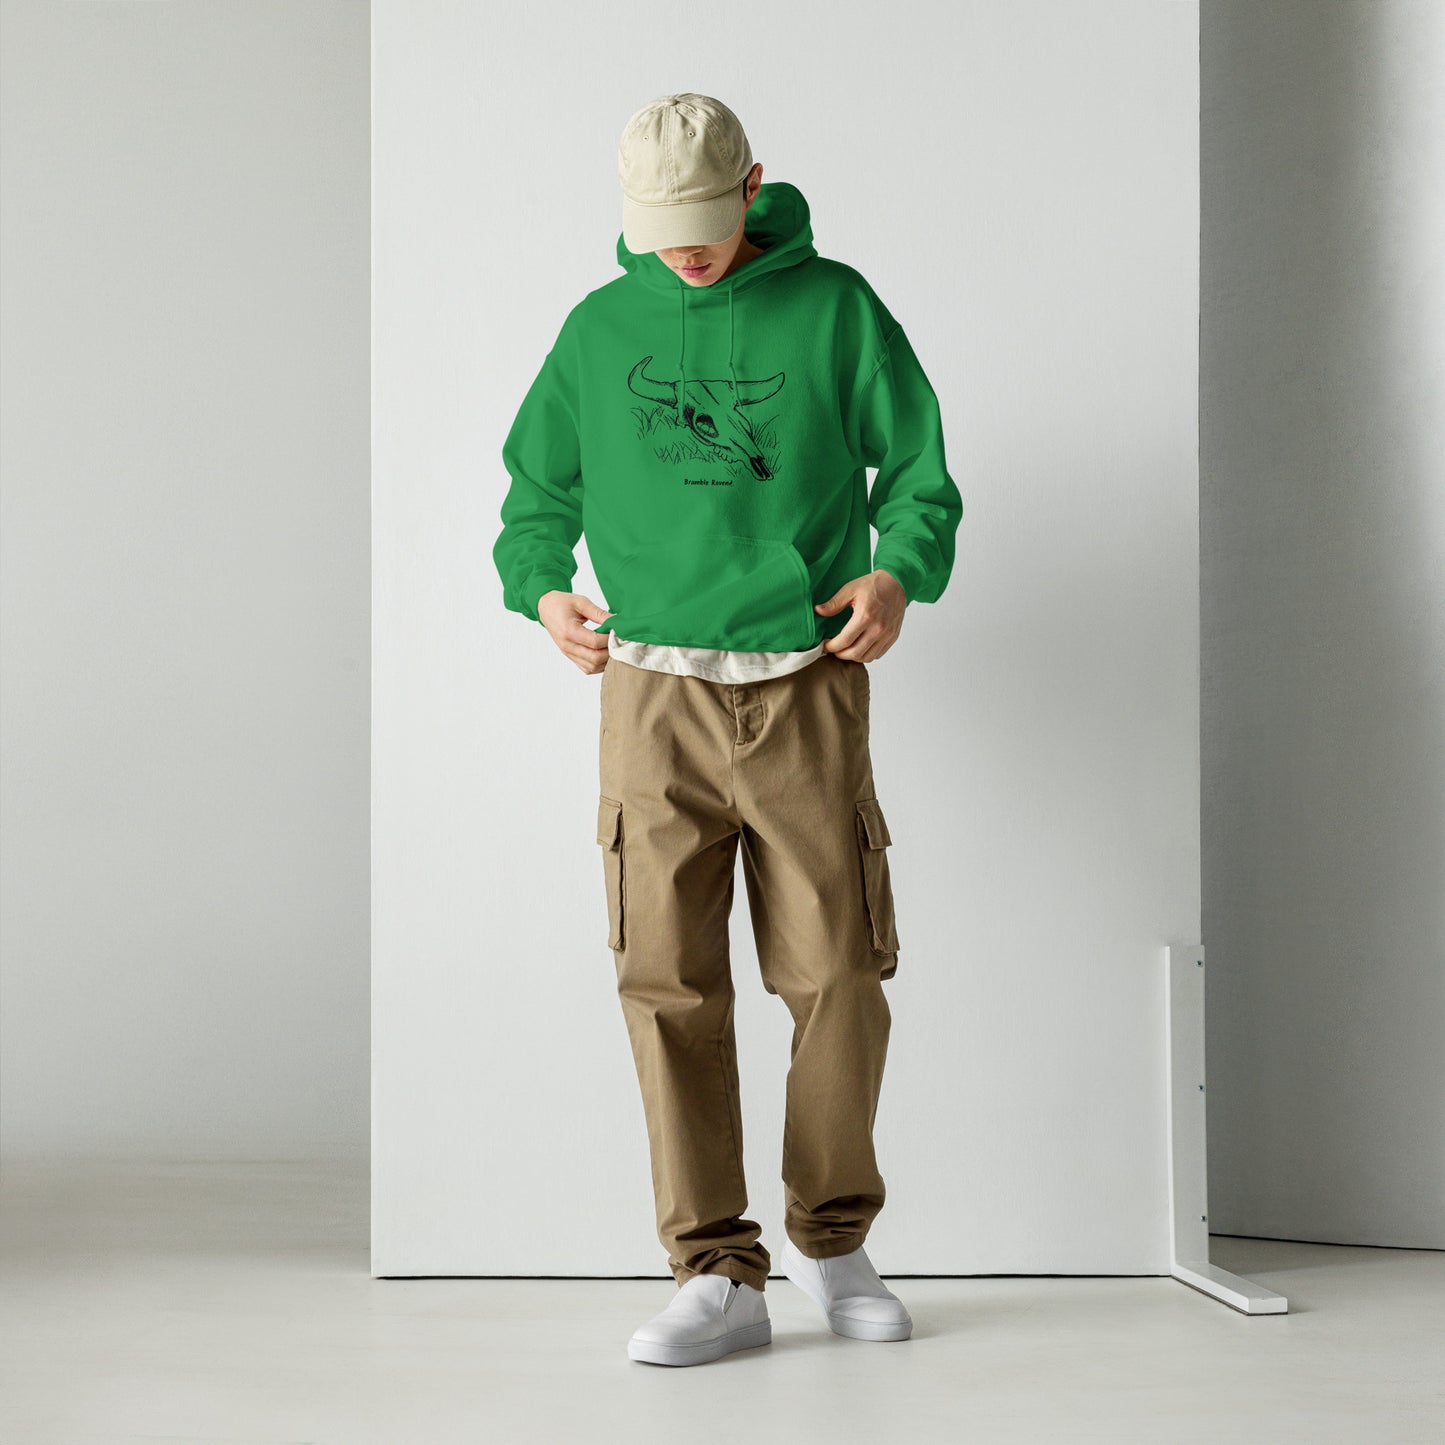 Irish green colored unisex hoodie. Front has image of a cow skull cradling a bird nest. Features double-lined hood and front pouch pocket. Shown on male model with khaki pants and baseball cap.